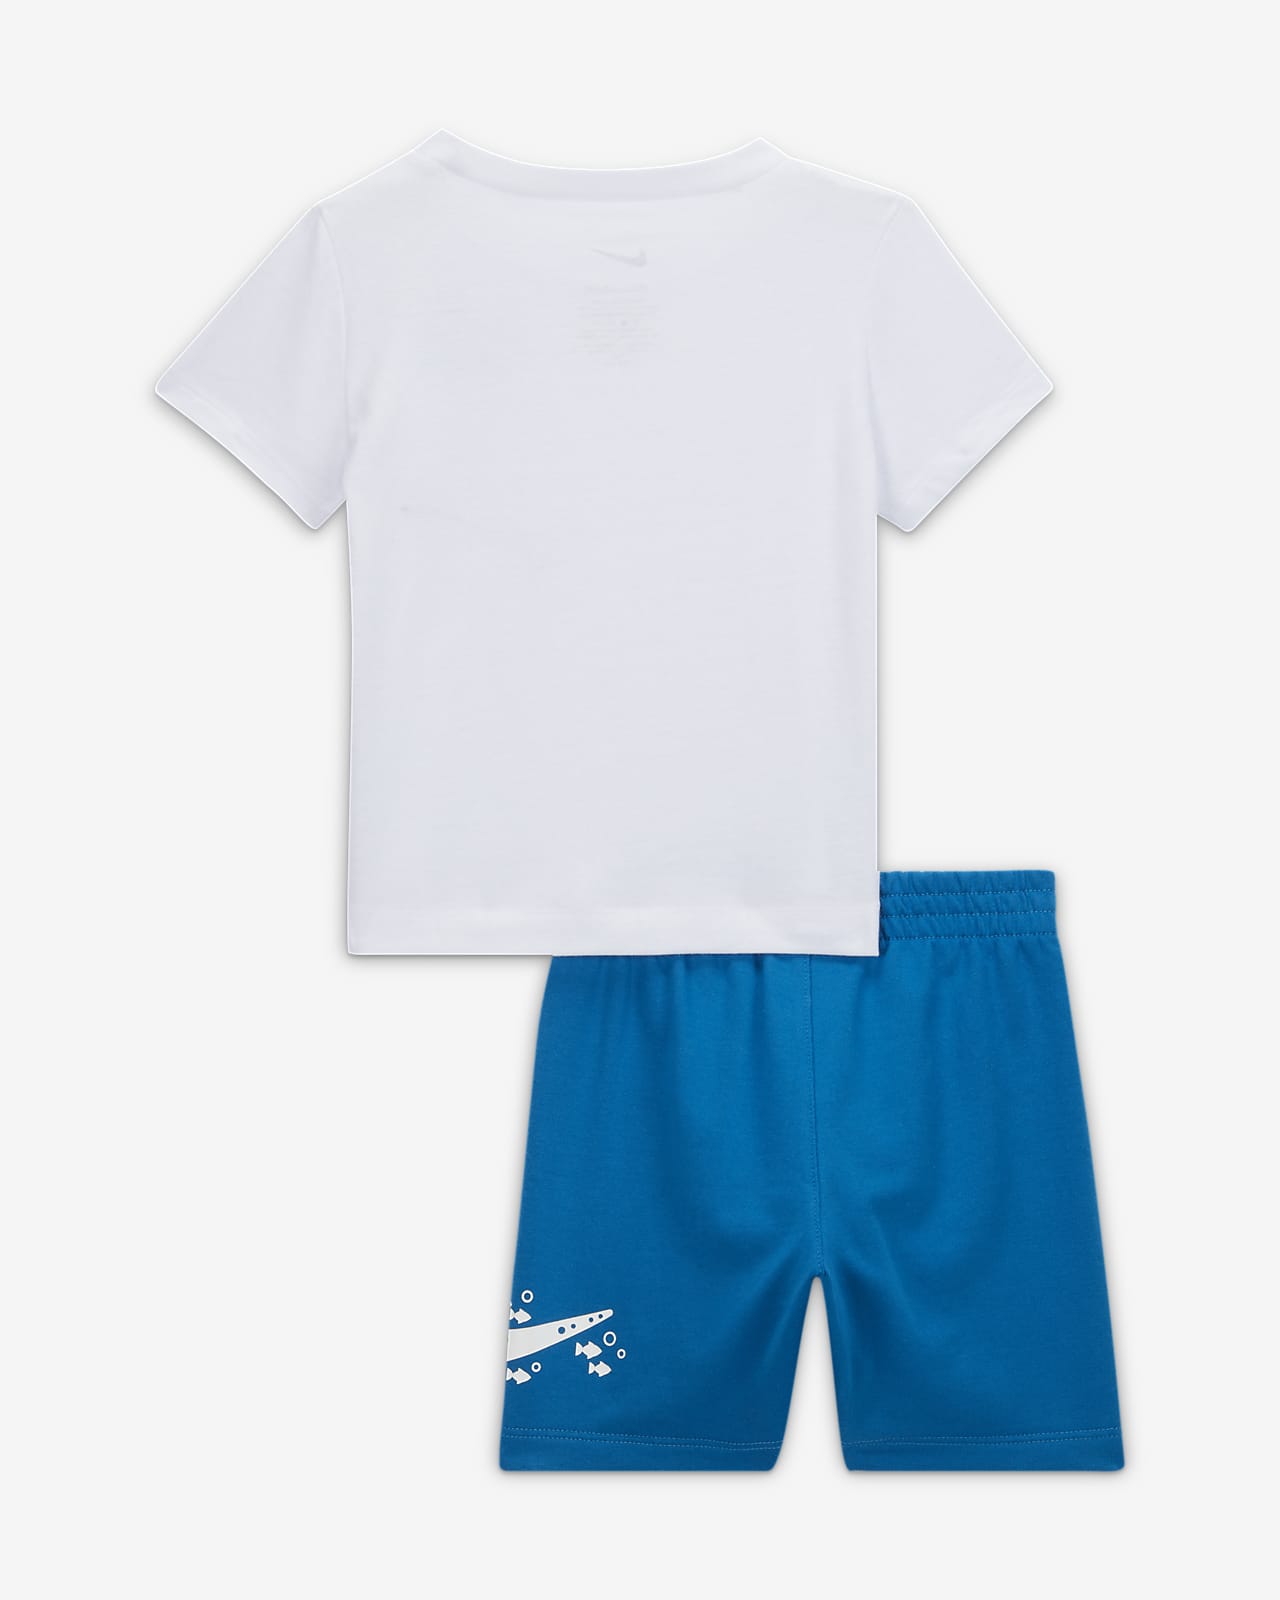 Nike Sportswear Coral Reef Tee and Shorts Set Younger Kids' 2-Piece Set.  Nike IE